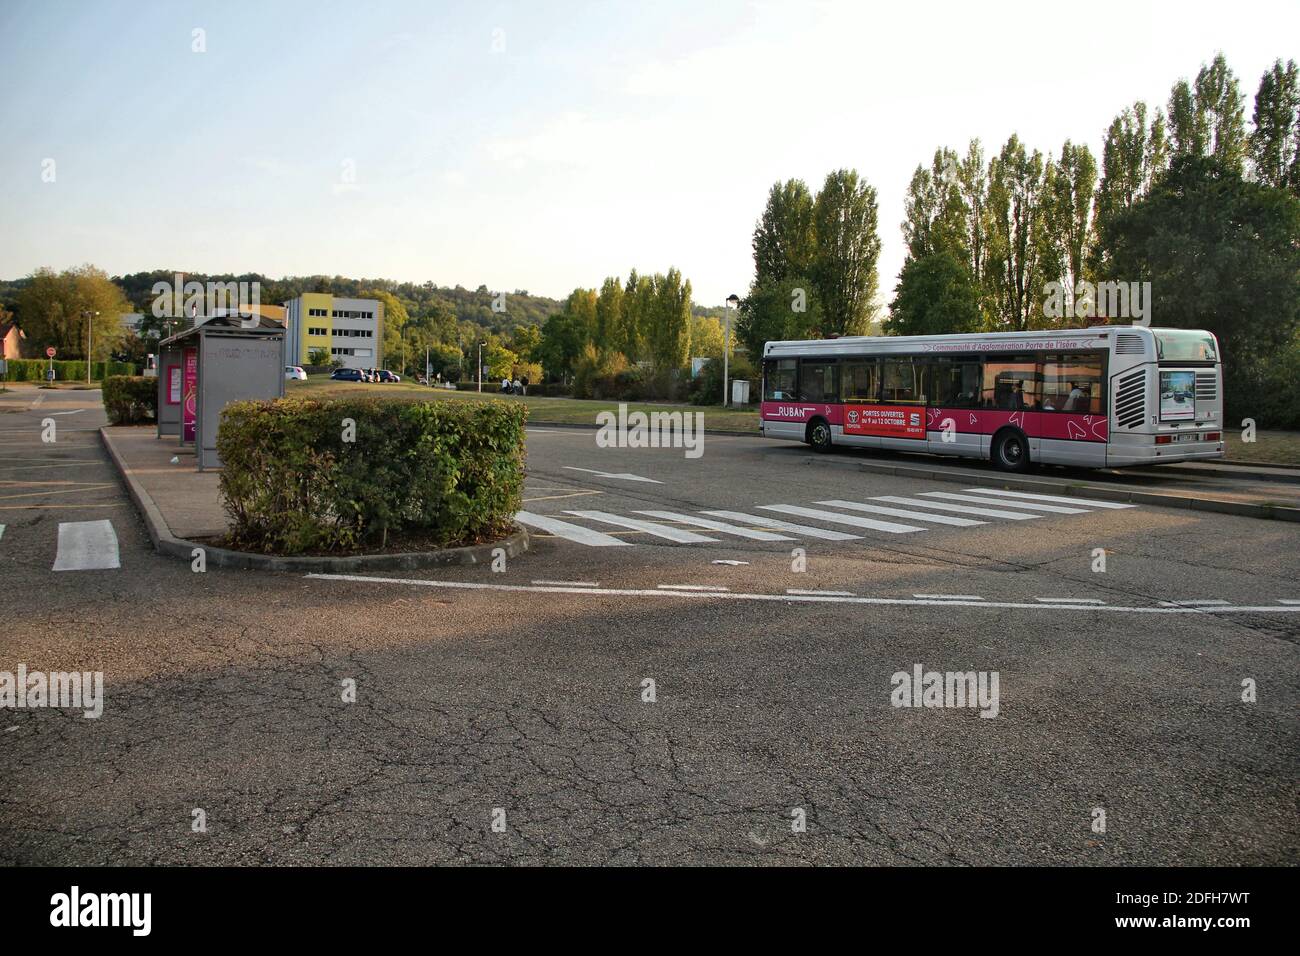 A picture shows the bus station where Victorine Dartois left her friends  and decided to walk back home after missing the bus on September 30, 2020,  in Villefontaine, central-eastern France. The body